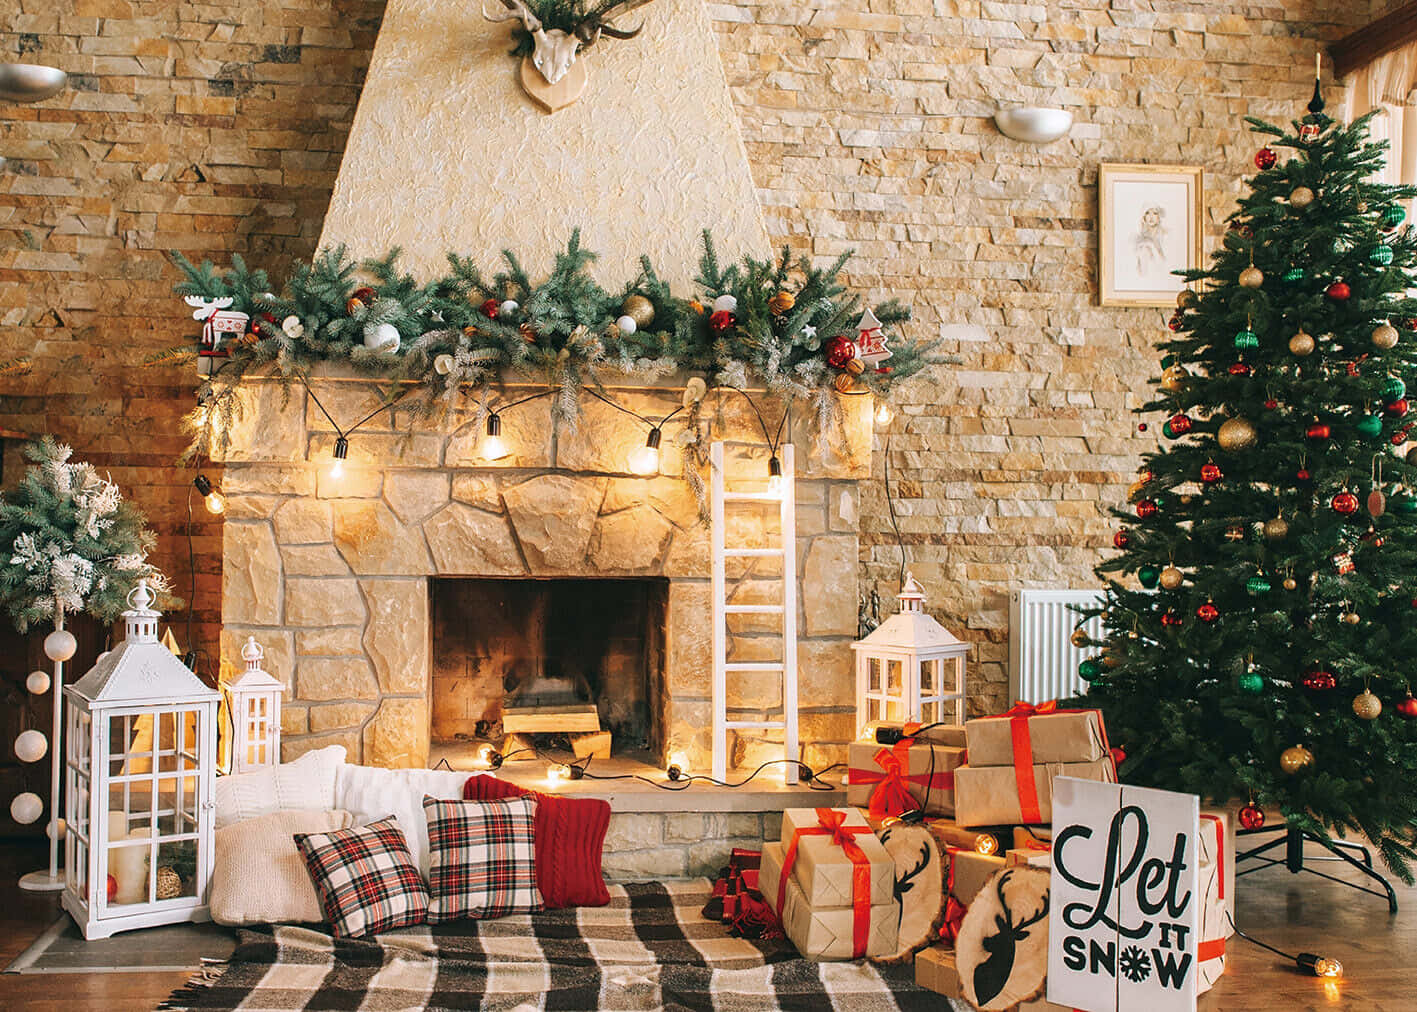 A Christmas Tree And Presents In Front Of A Fireplace